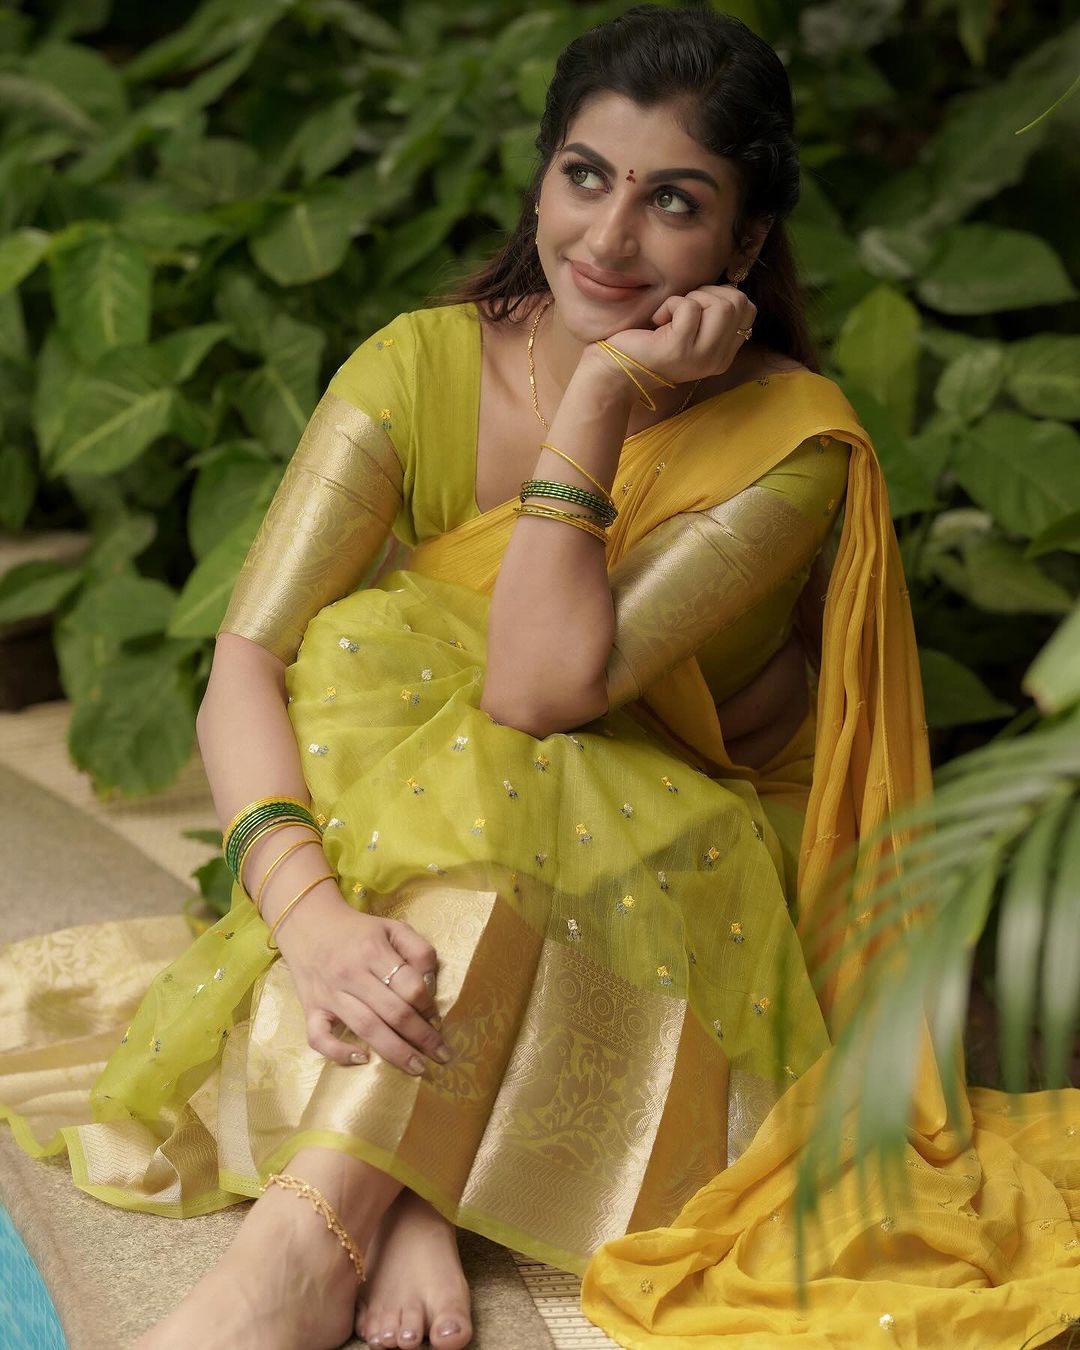 Yashika anand ups her fashion quotient in these pictures-Actressyashika, Yashika Anand, Bigboss, Yaashika Anand, Yashika, Yashika Aanand, Yashika Aannand, Yashikaanand Photos,Spicy Hot Pics,Images,High Resolution WallPapers Download